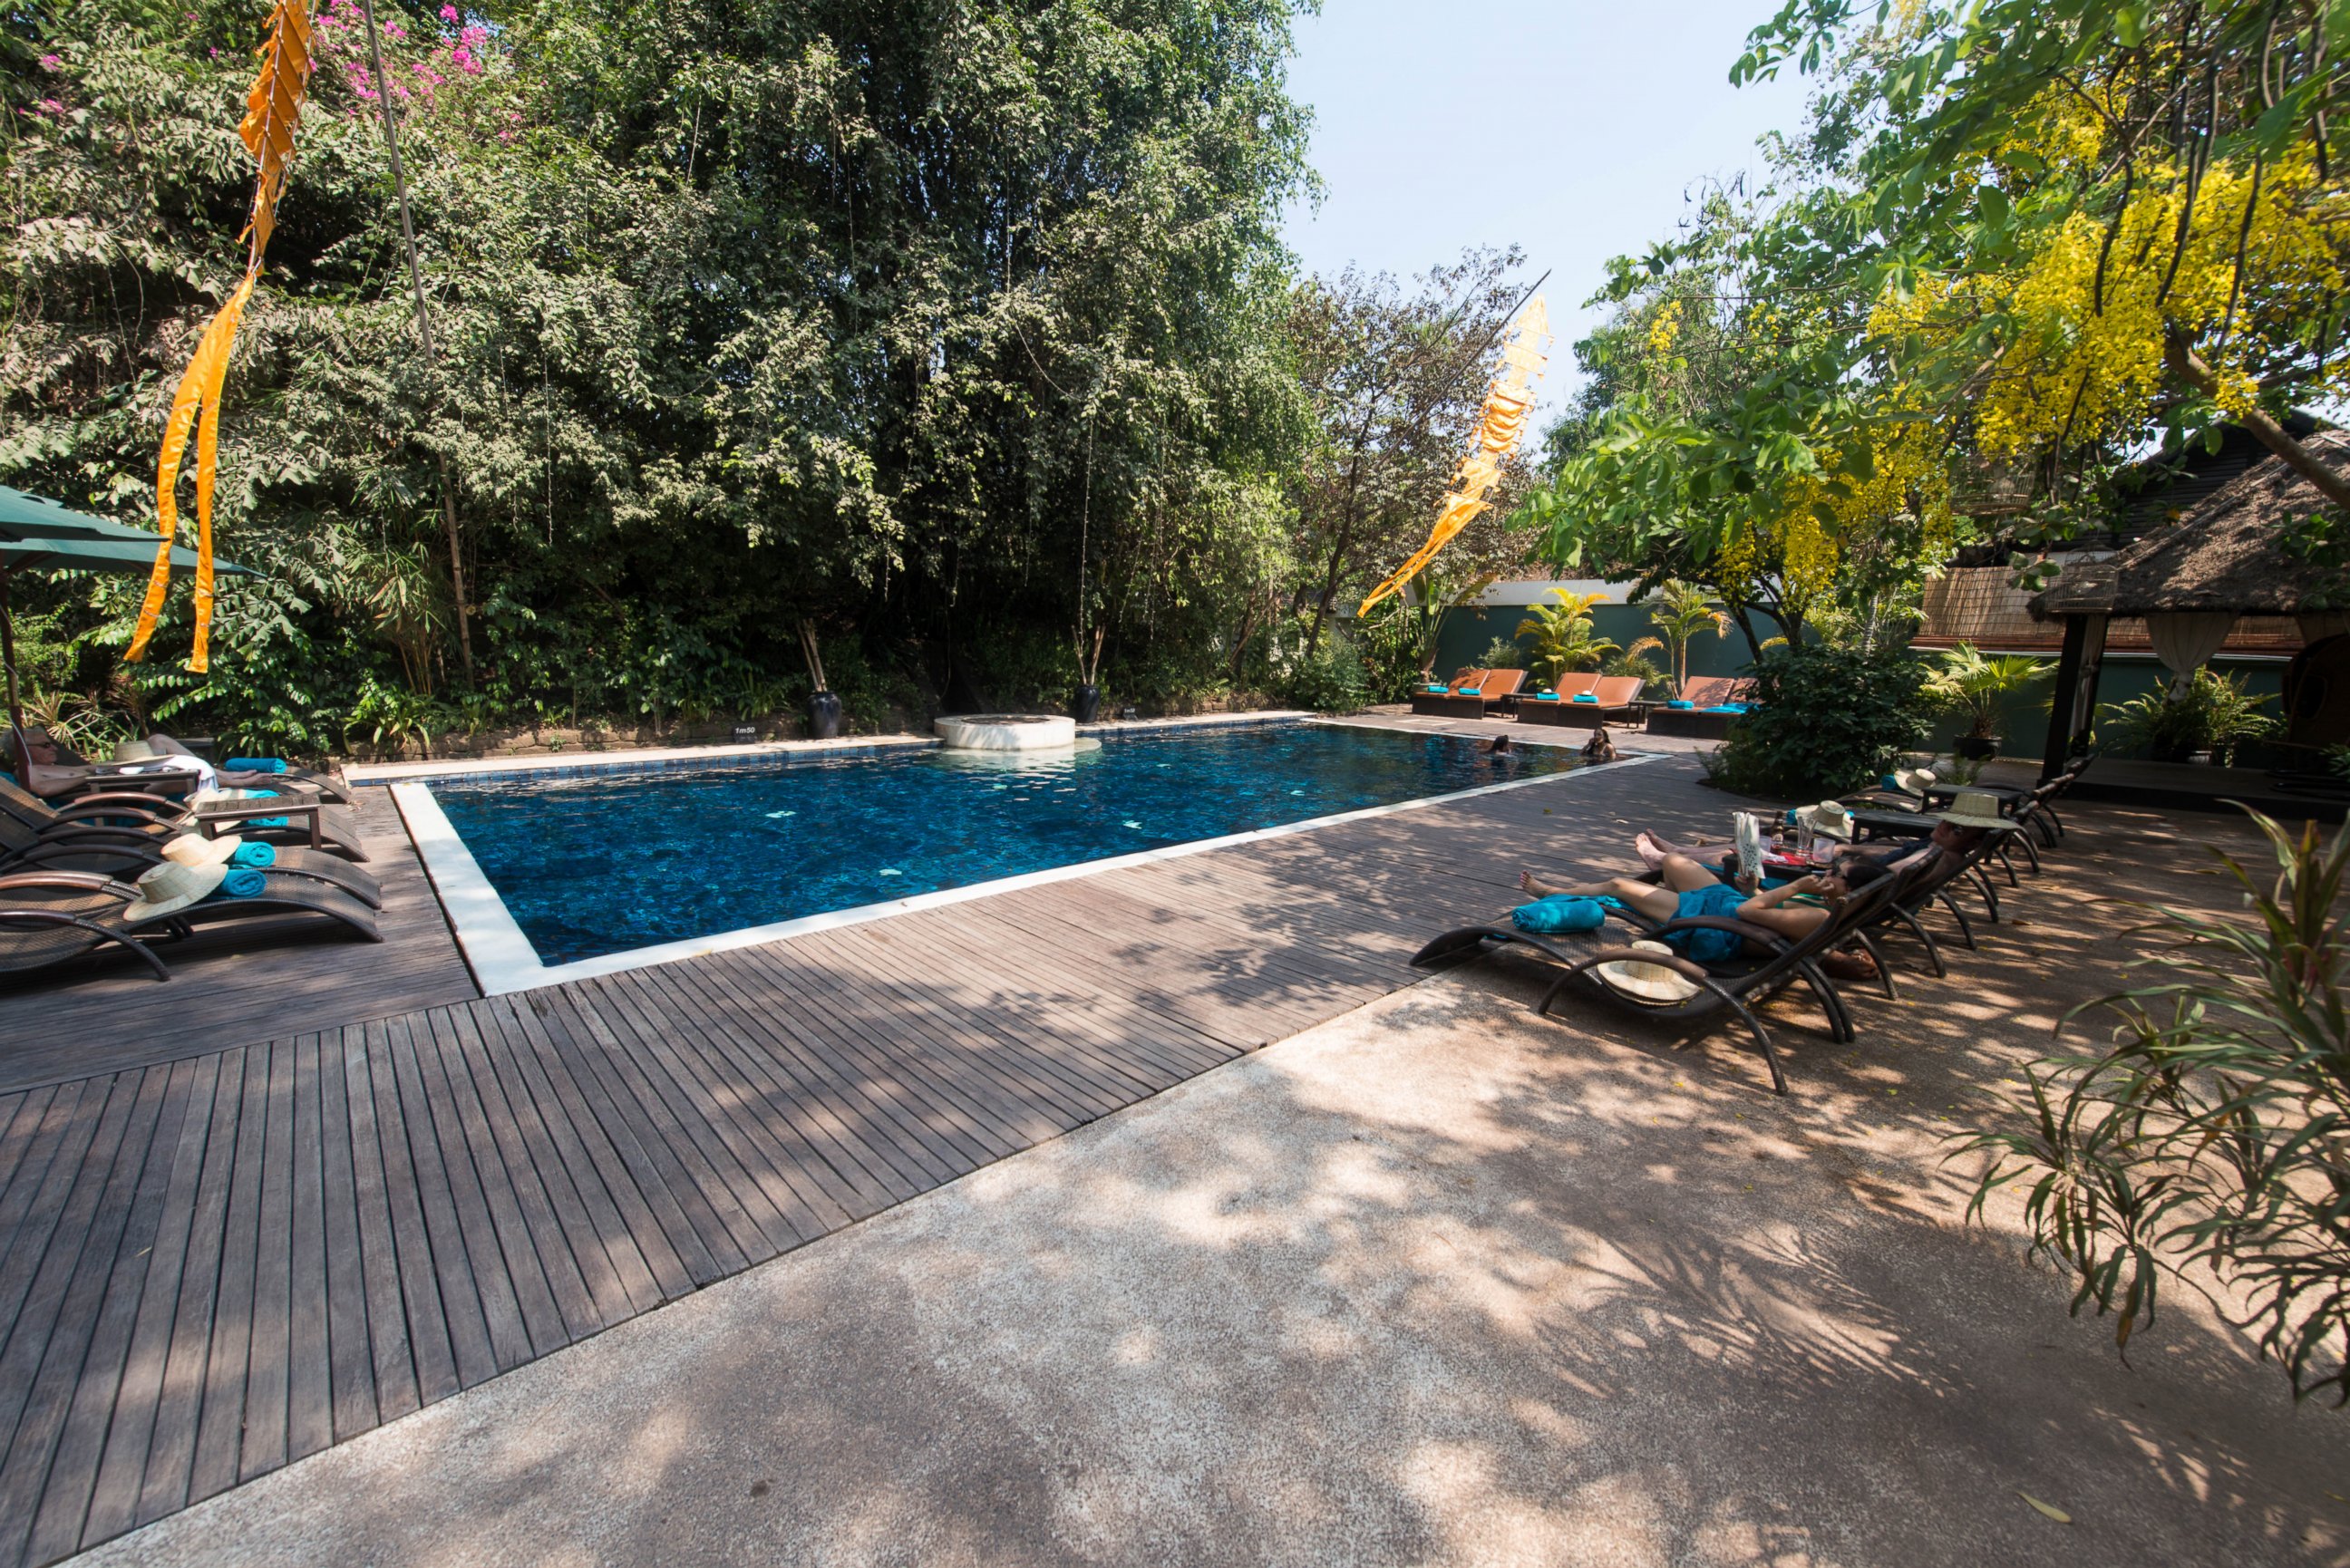 PHOTO: The pool at the Heritage Suites Hotel in Siem Reap, Cambodia. 